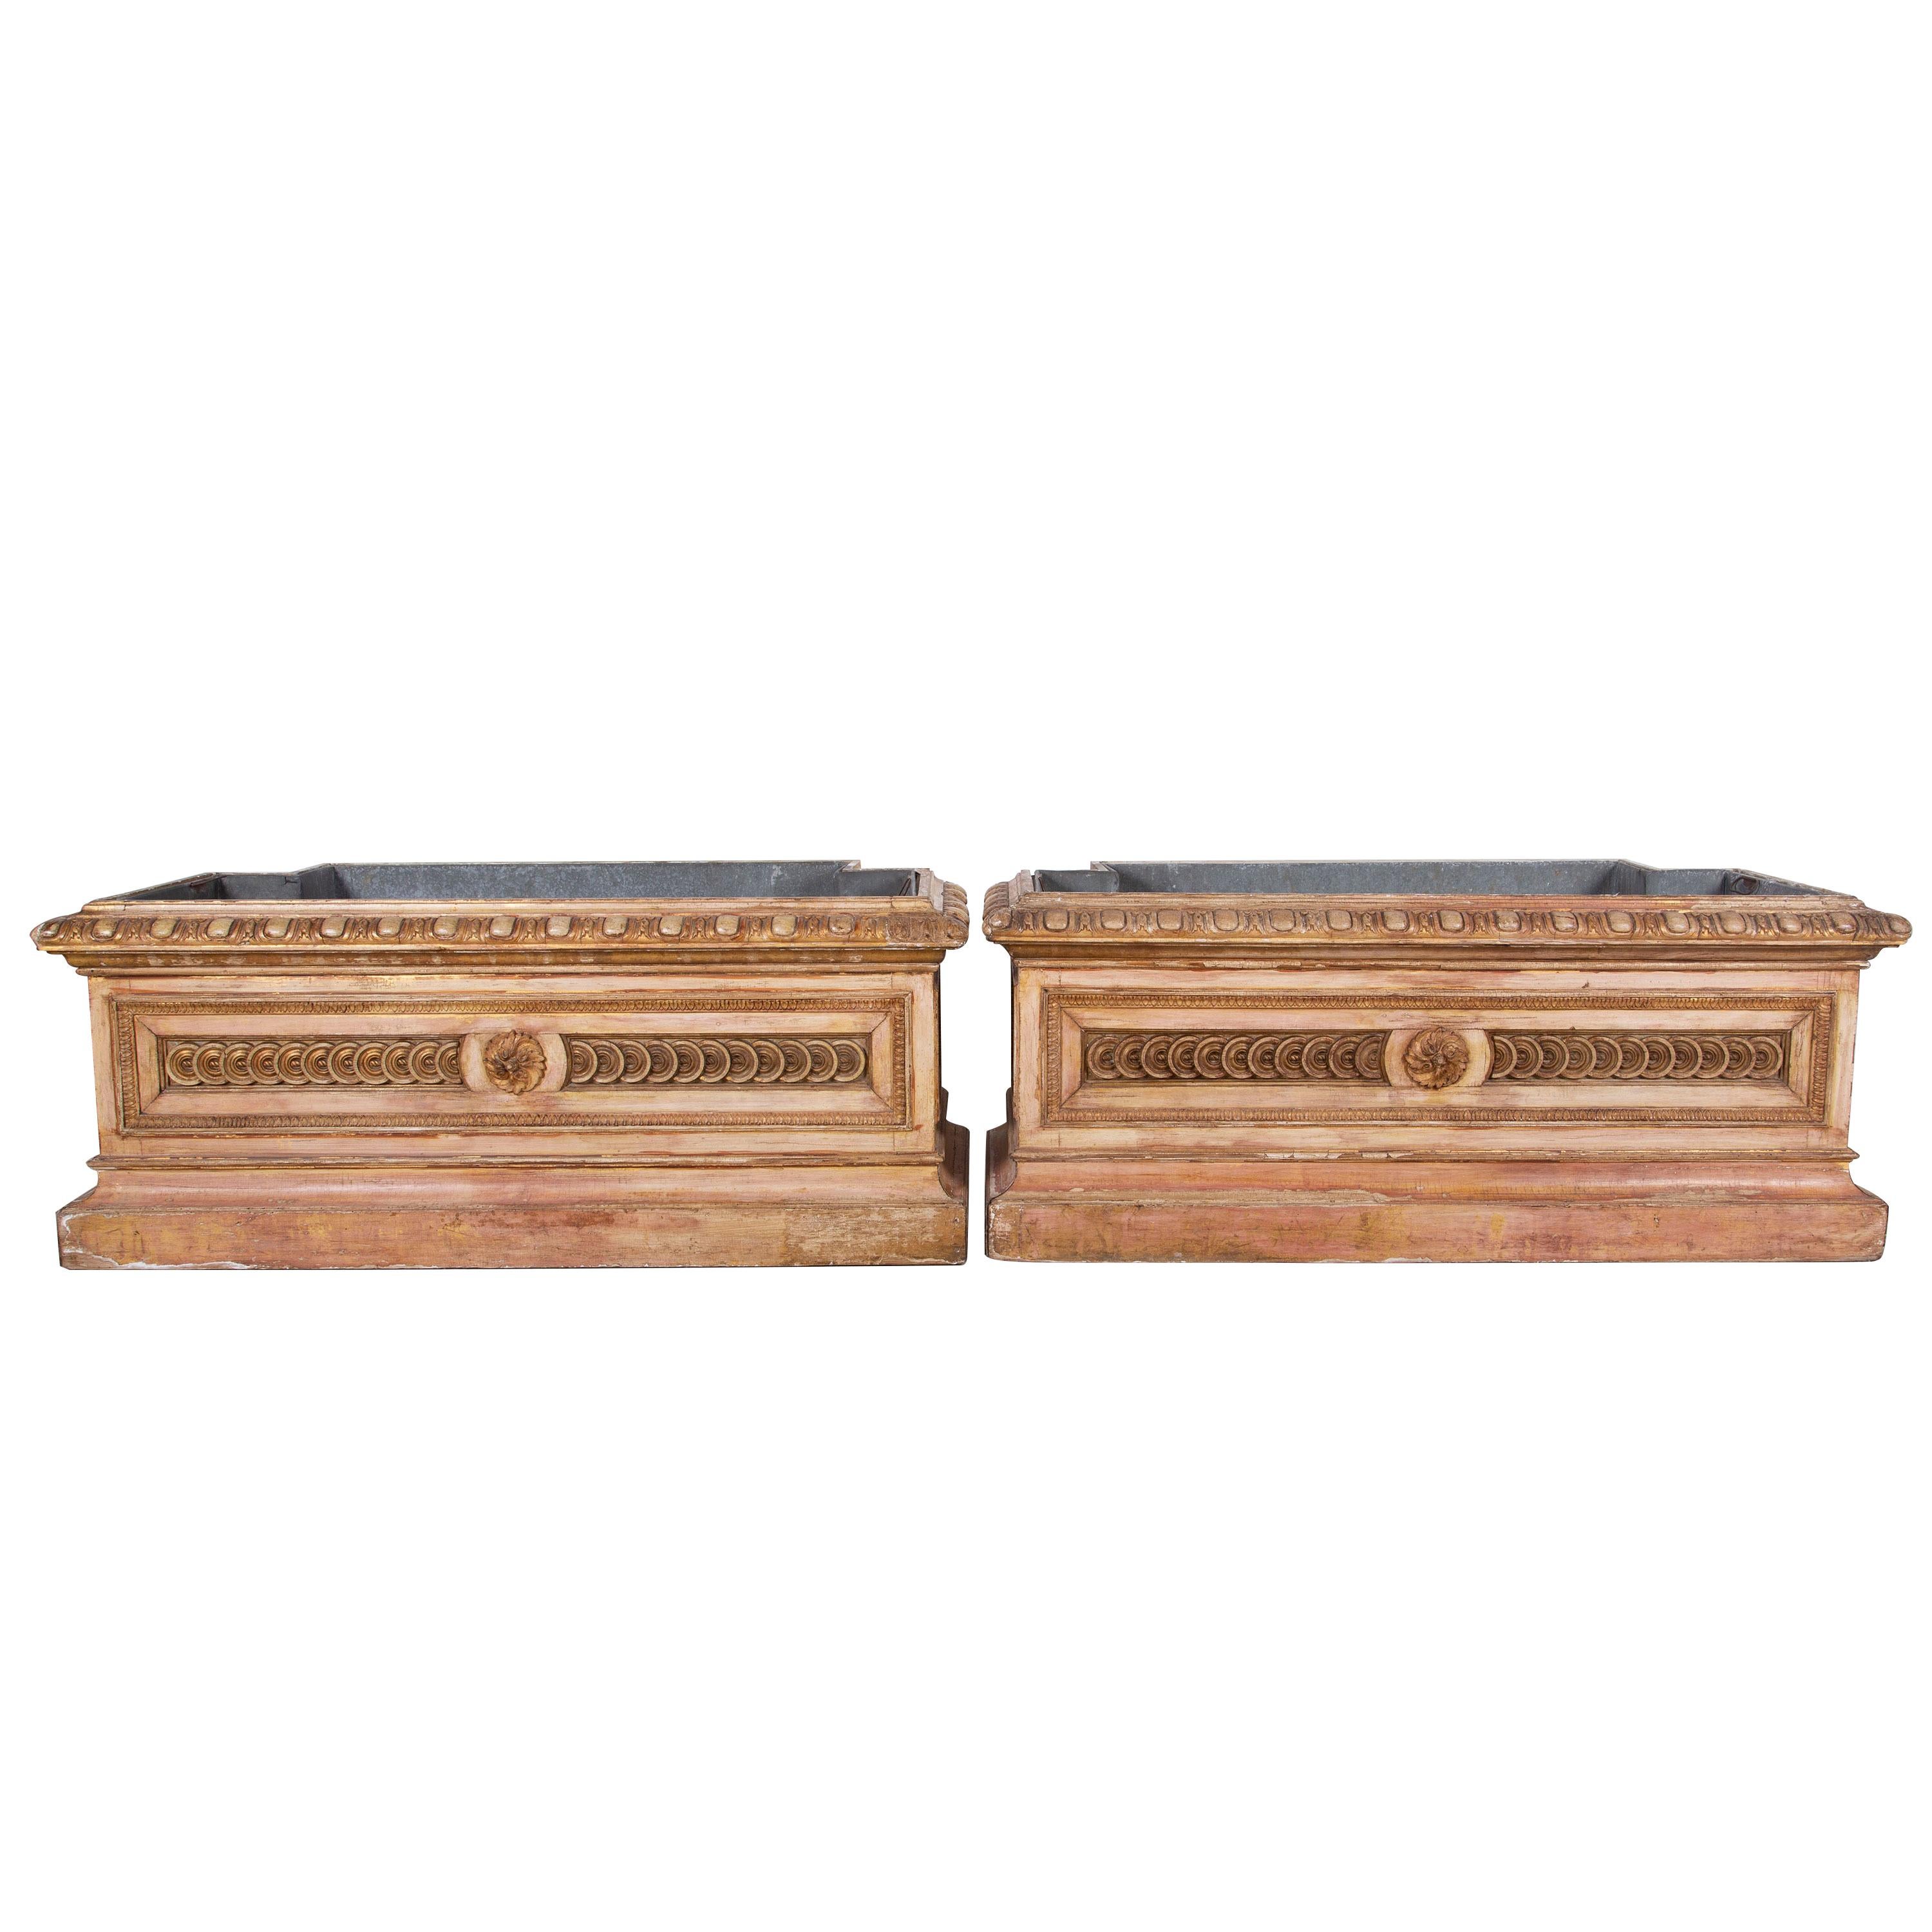 A statement pair of rare and highly decorative late 19th century Italian planters in the Directoire style with original zinc lining and beautiful repeated carved panels to the front and sides.